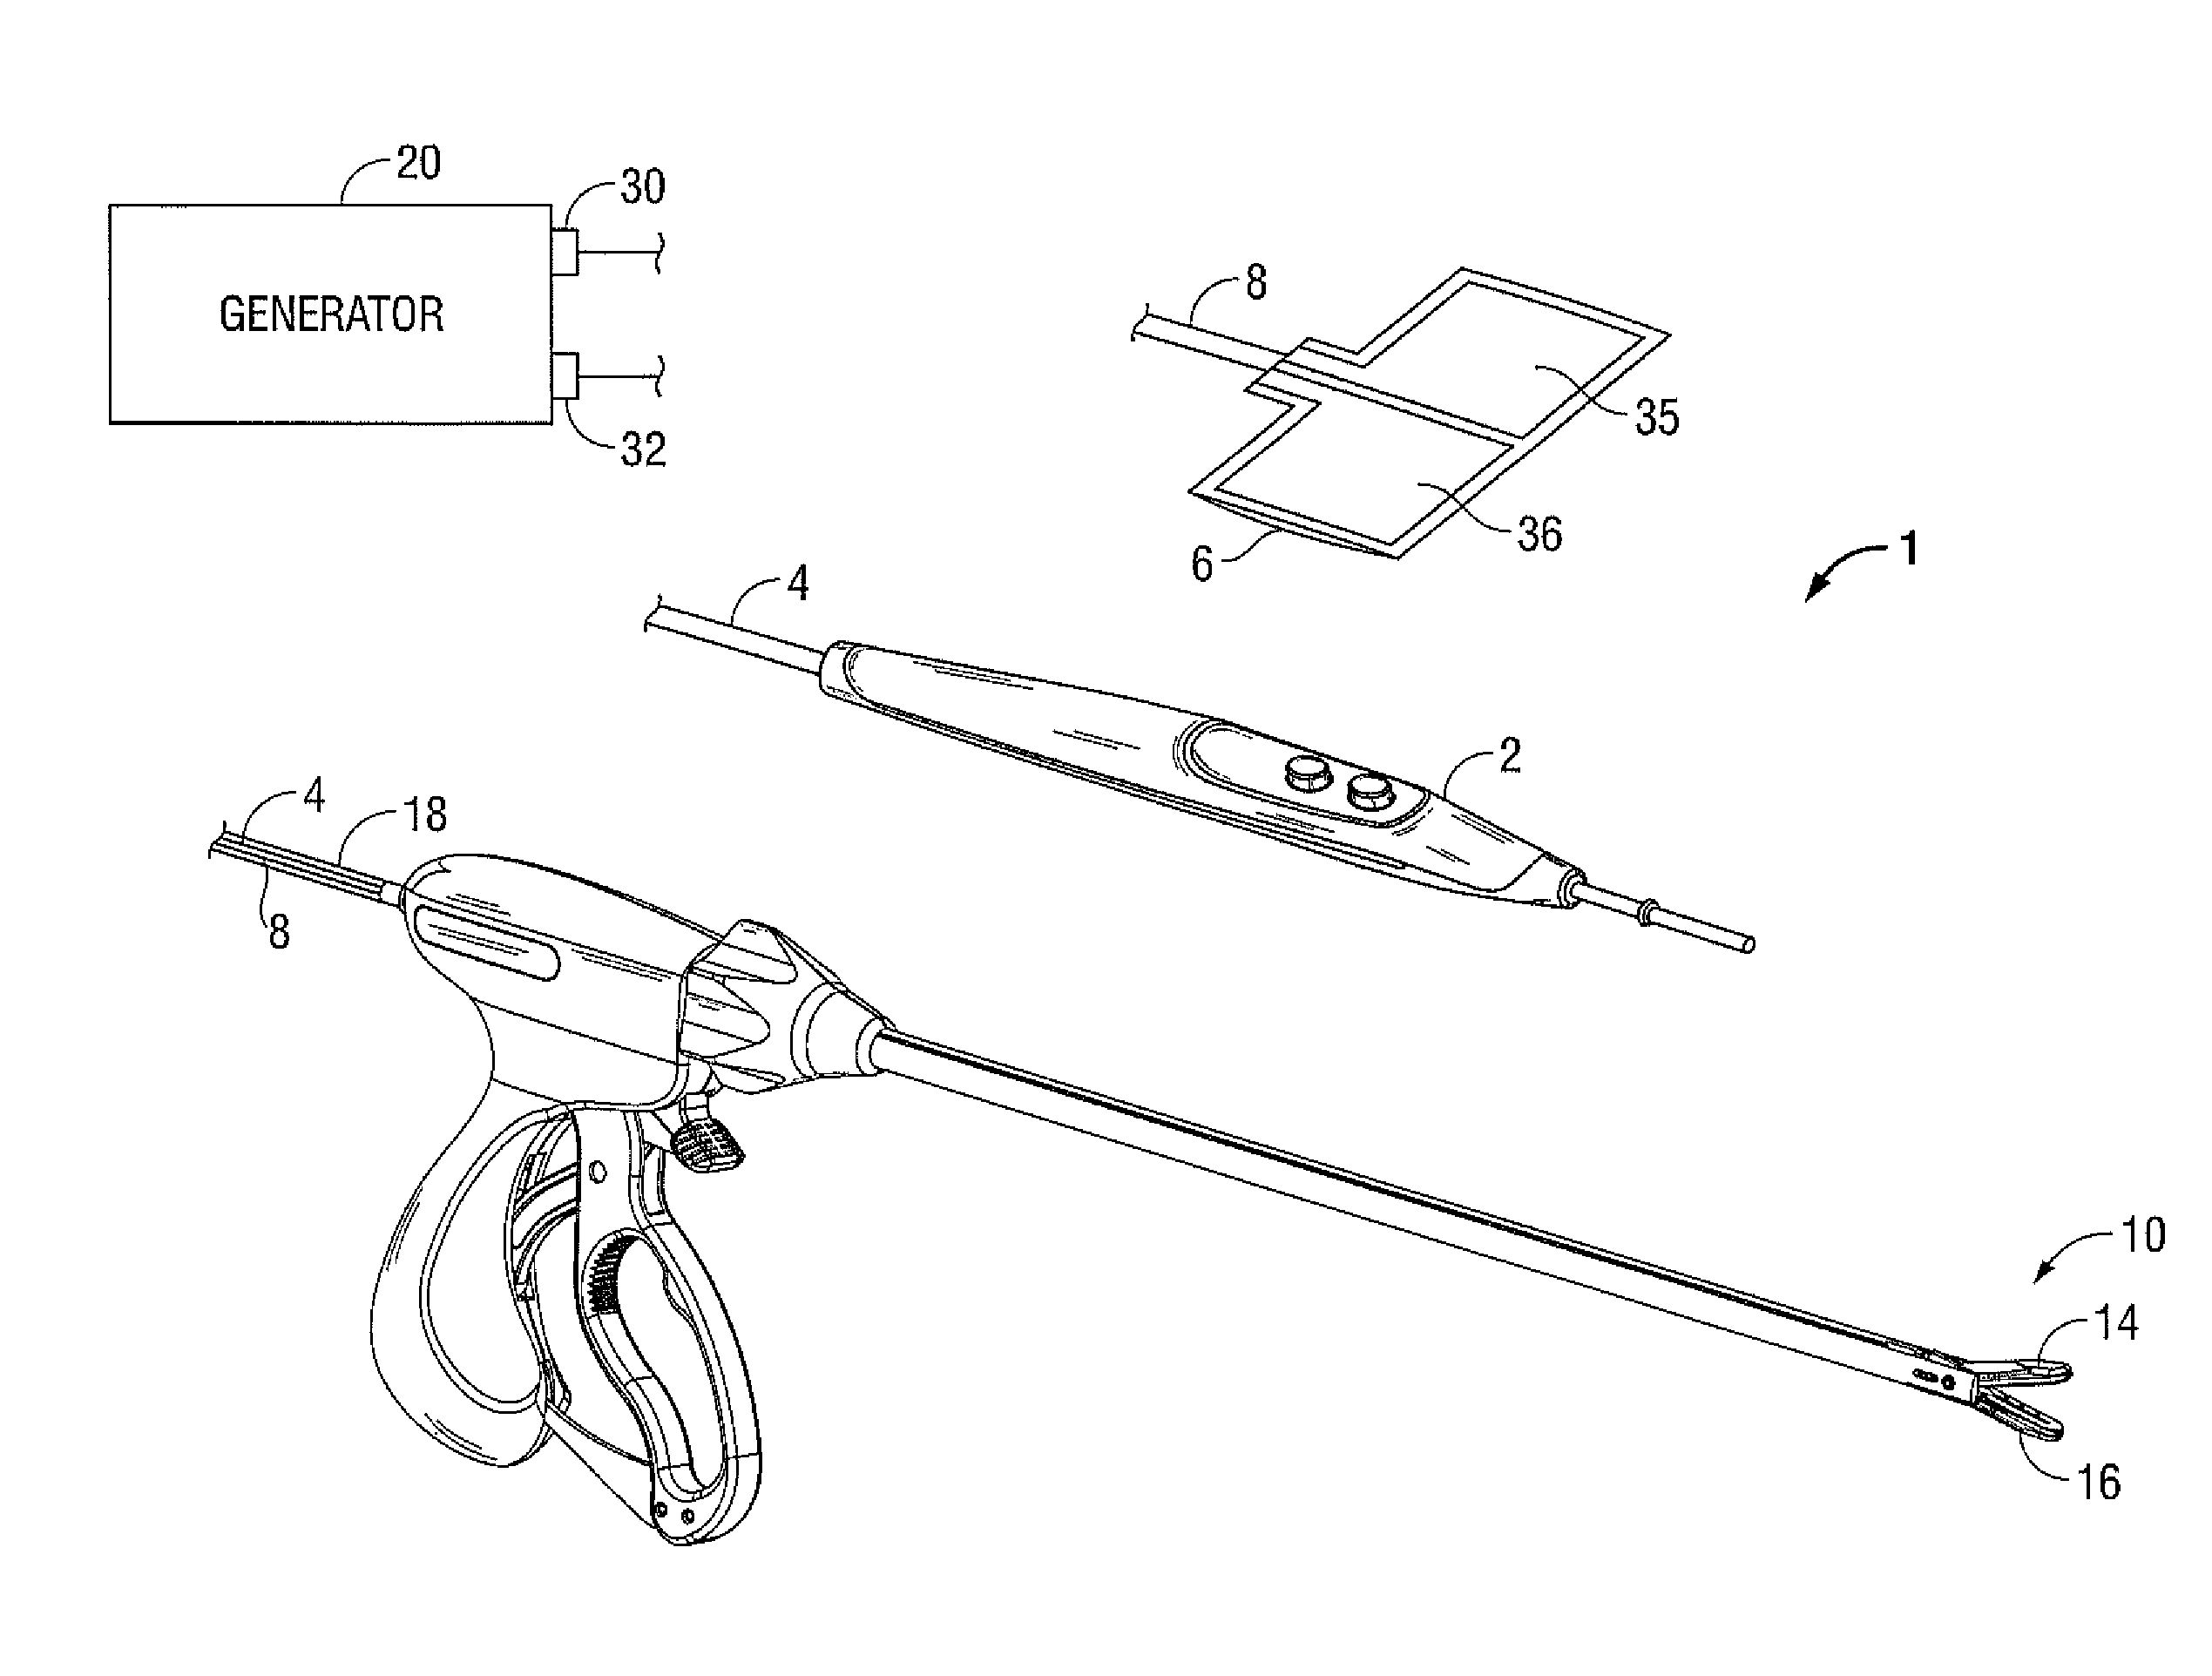 System and Method for Augmented Impedance Sensing